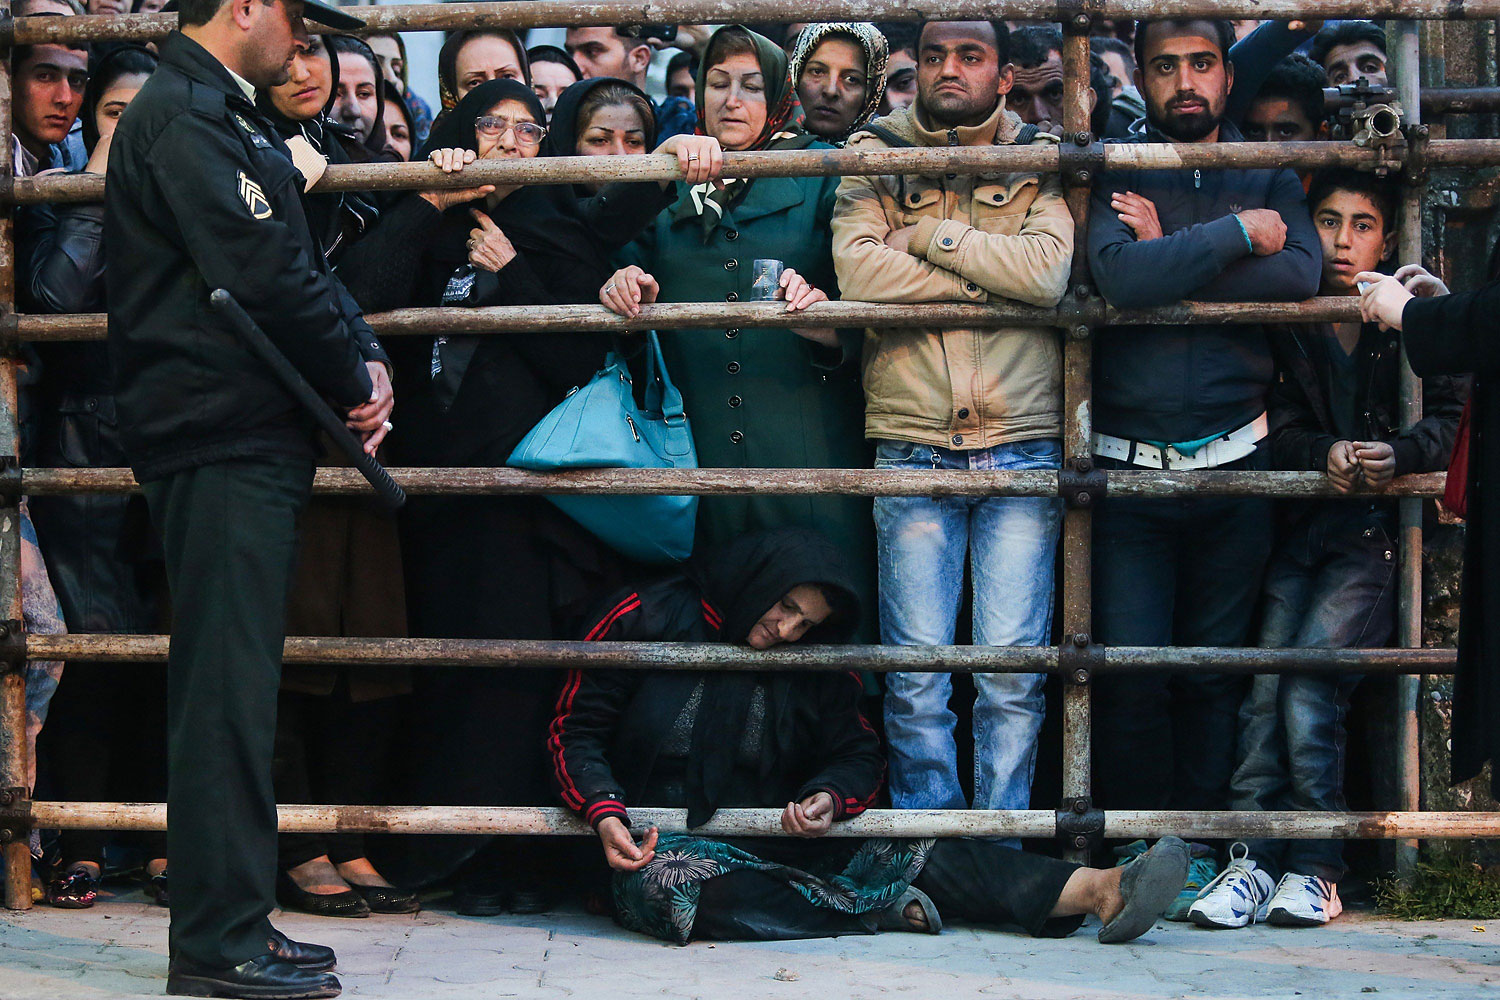 The mother of Balal asks for the family's forgiveness as her son is brought to the gallows during his execution ceremony in the northern city of Nowshahr on April 15, 2014.